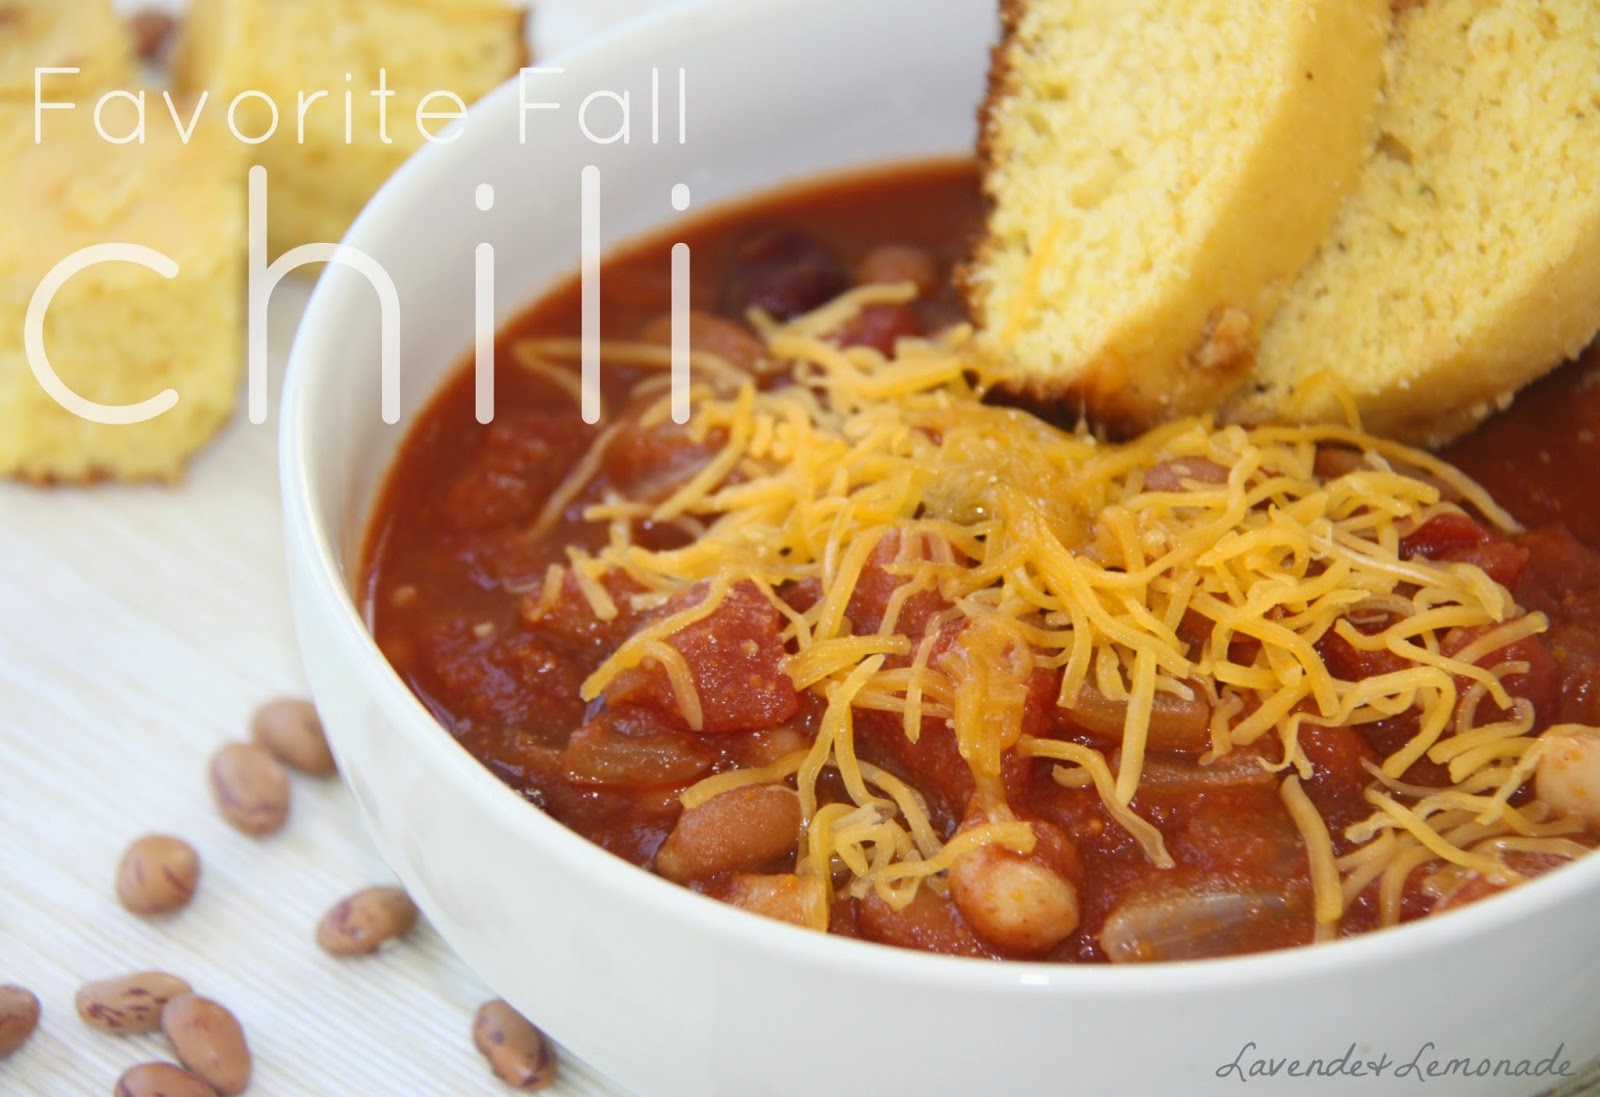 The best chili recipe - and its meatless!  Recipe and Tutorial on Lavende & Lemonade